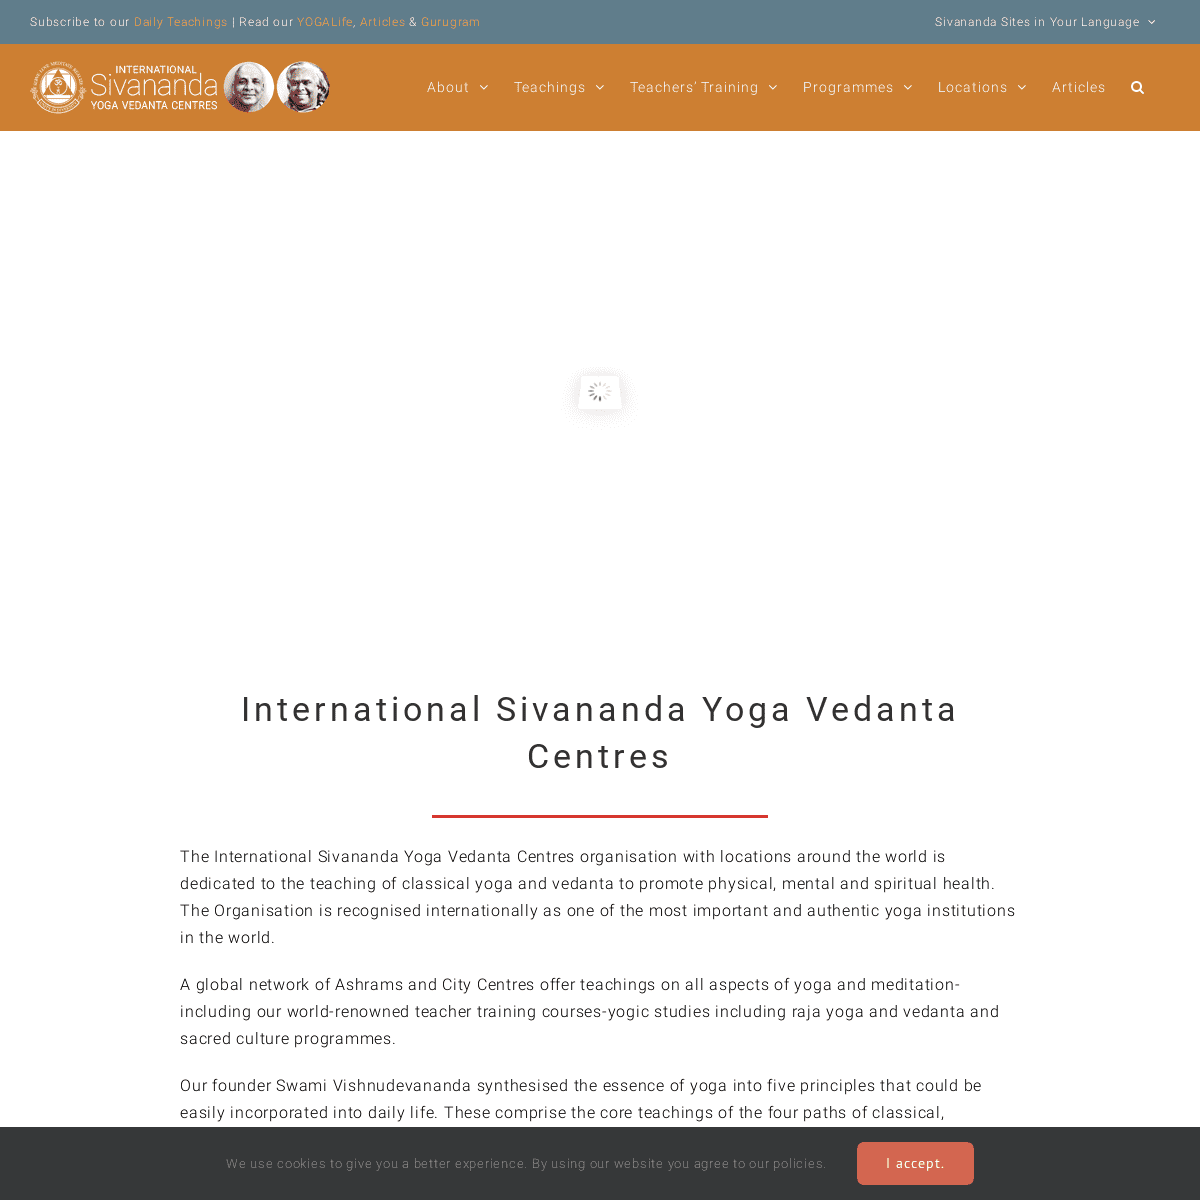 A complete backup of https://sivananda.org